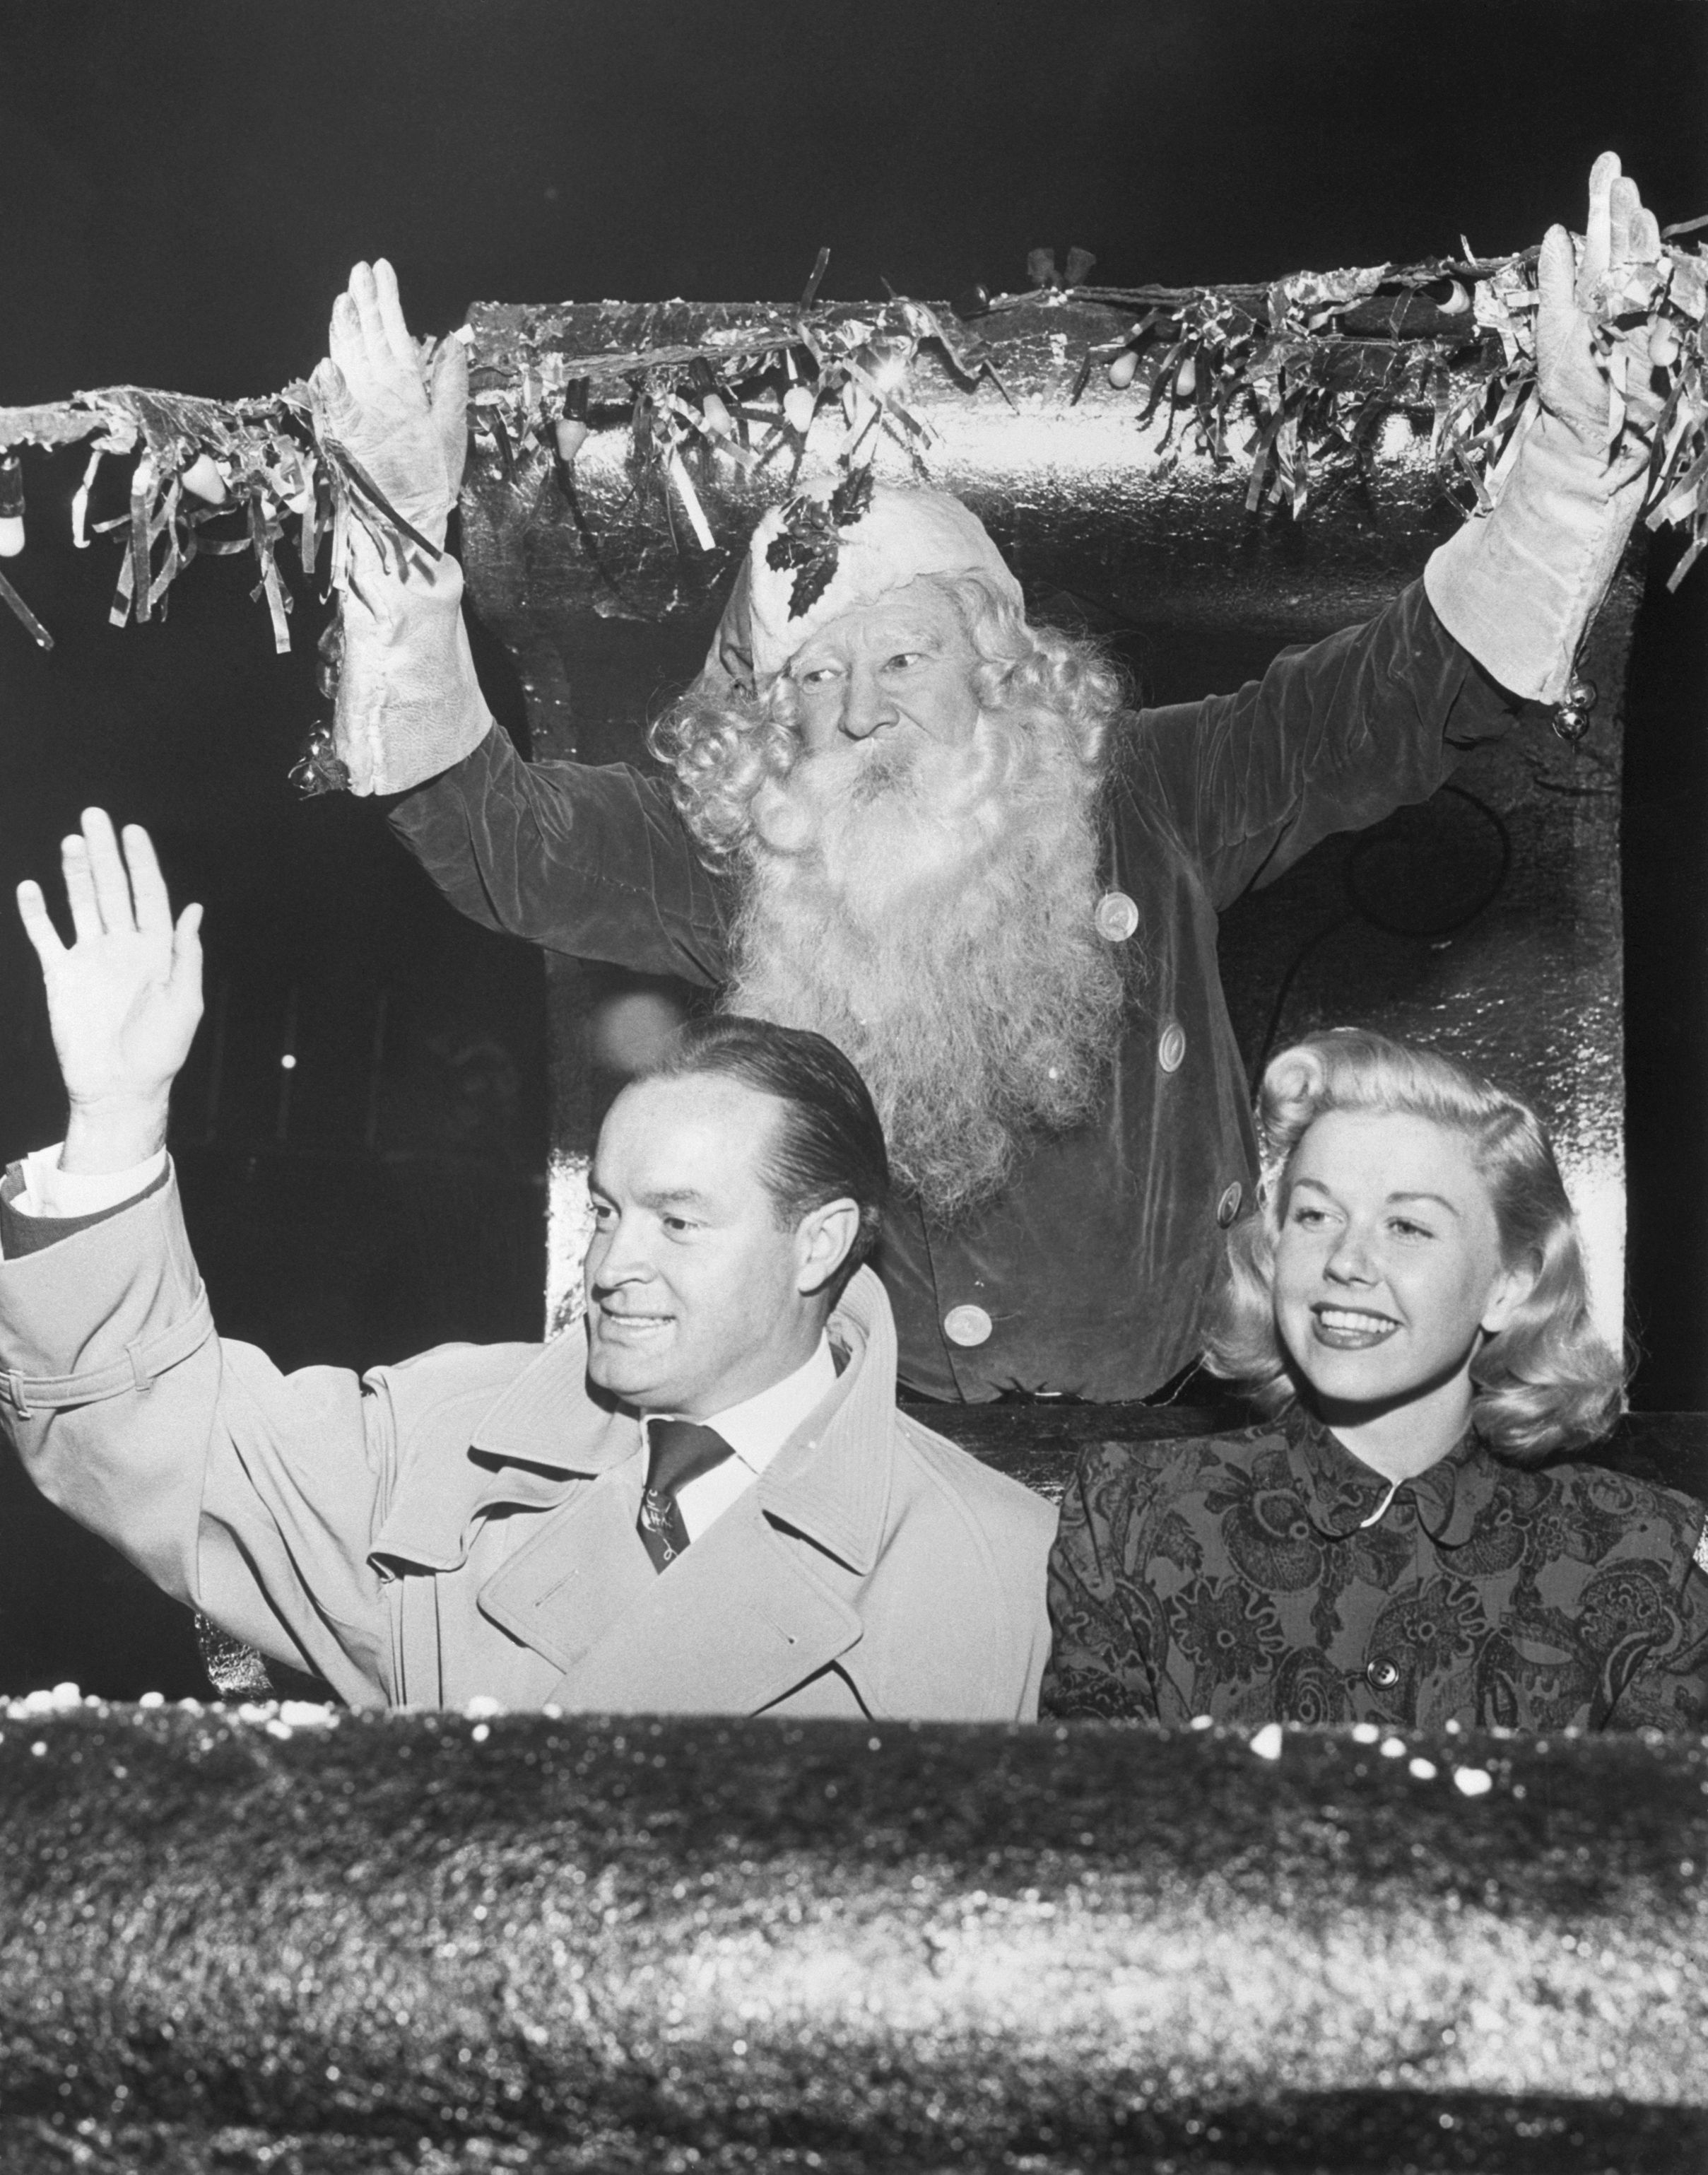 1940's vintage holiday images with celebs